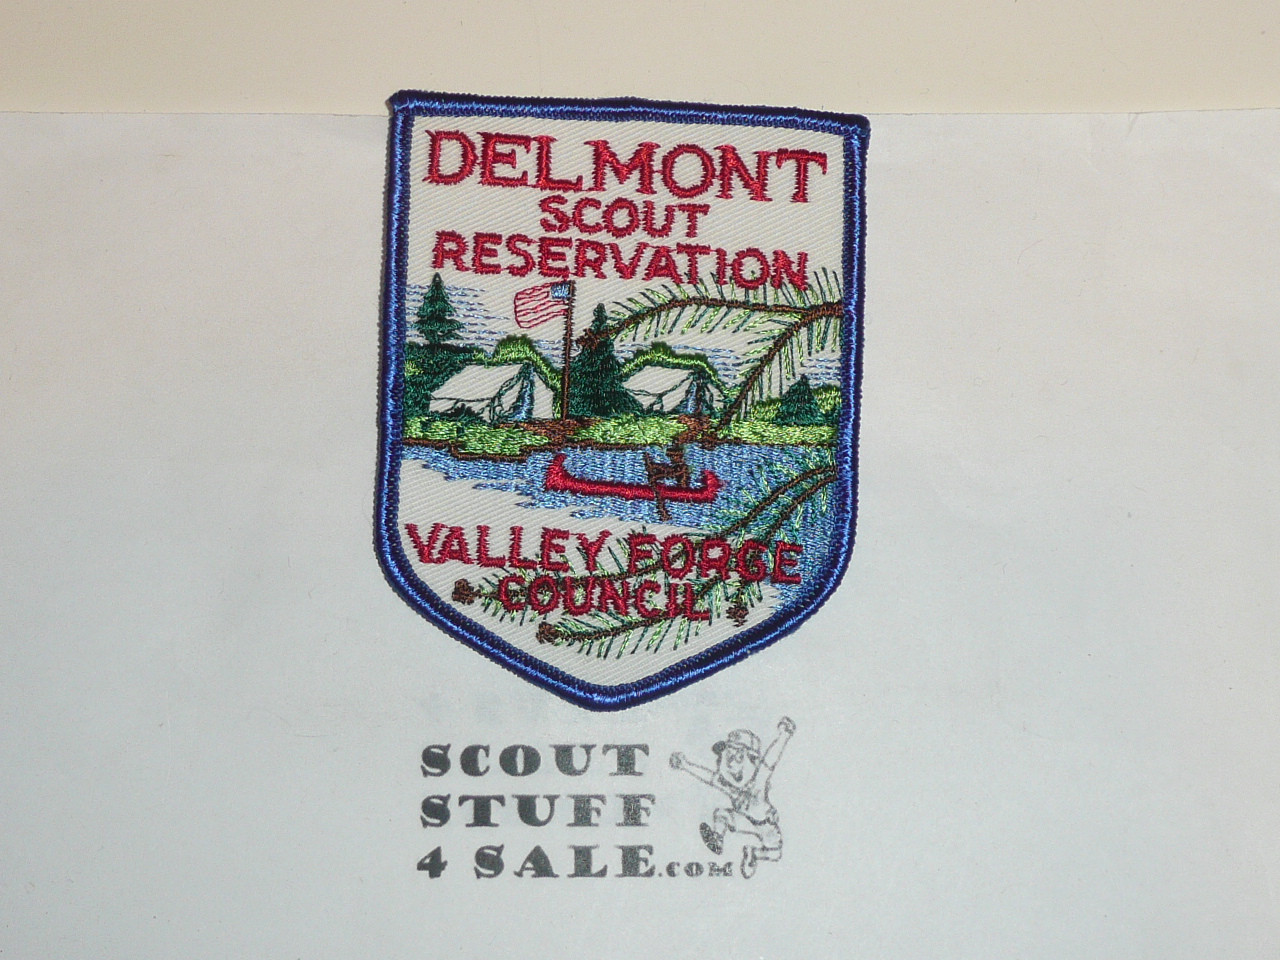 Delmont Scout Reservation Patch, Valley Forge Council, shield